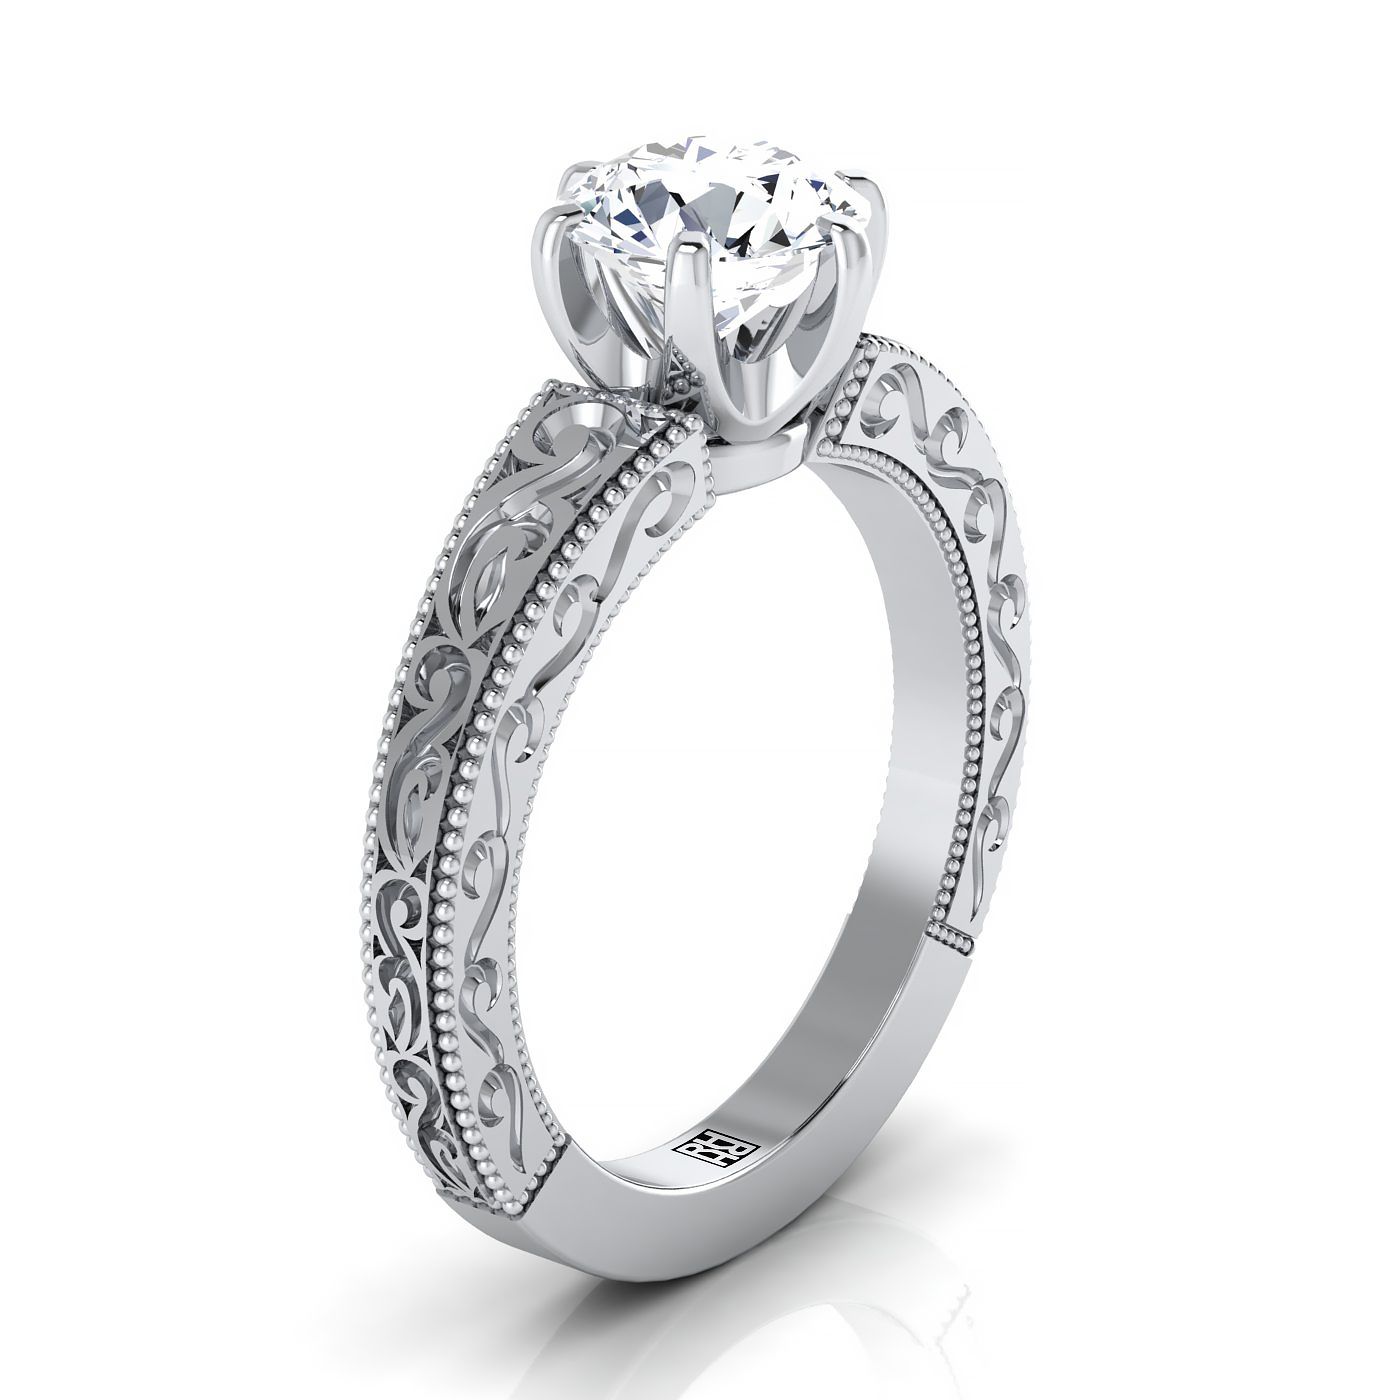 14K White Gold Round Brilliant Hand Engraved Scroll Vintage Solitaire Engagement Ring